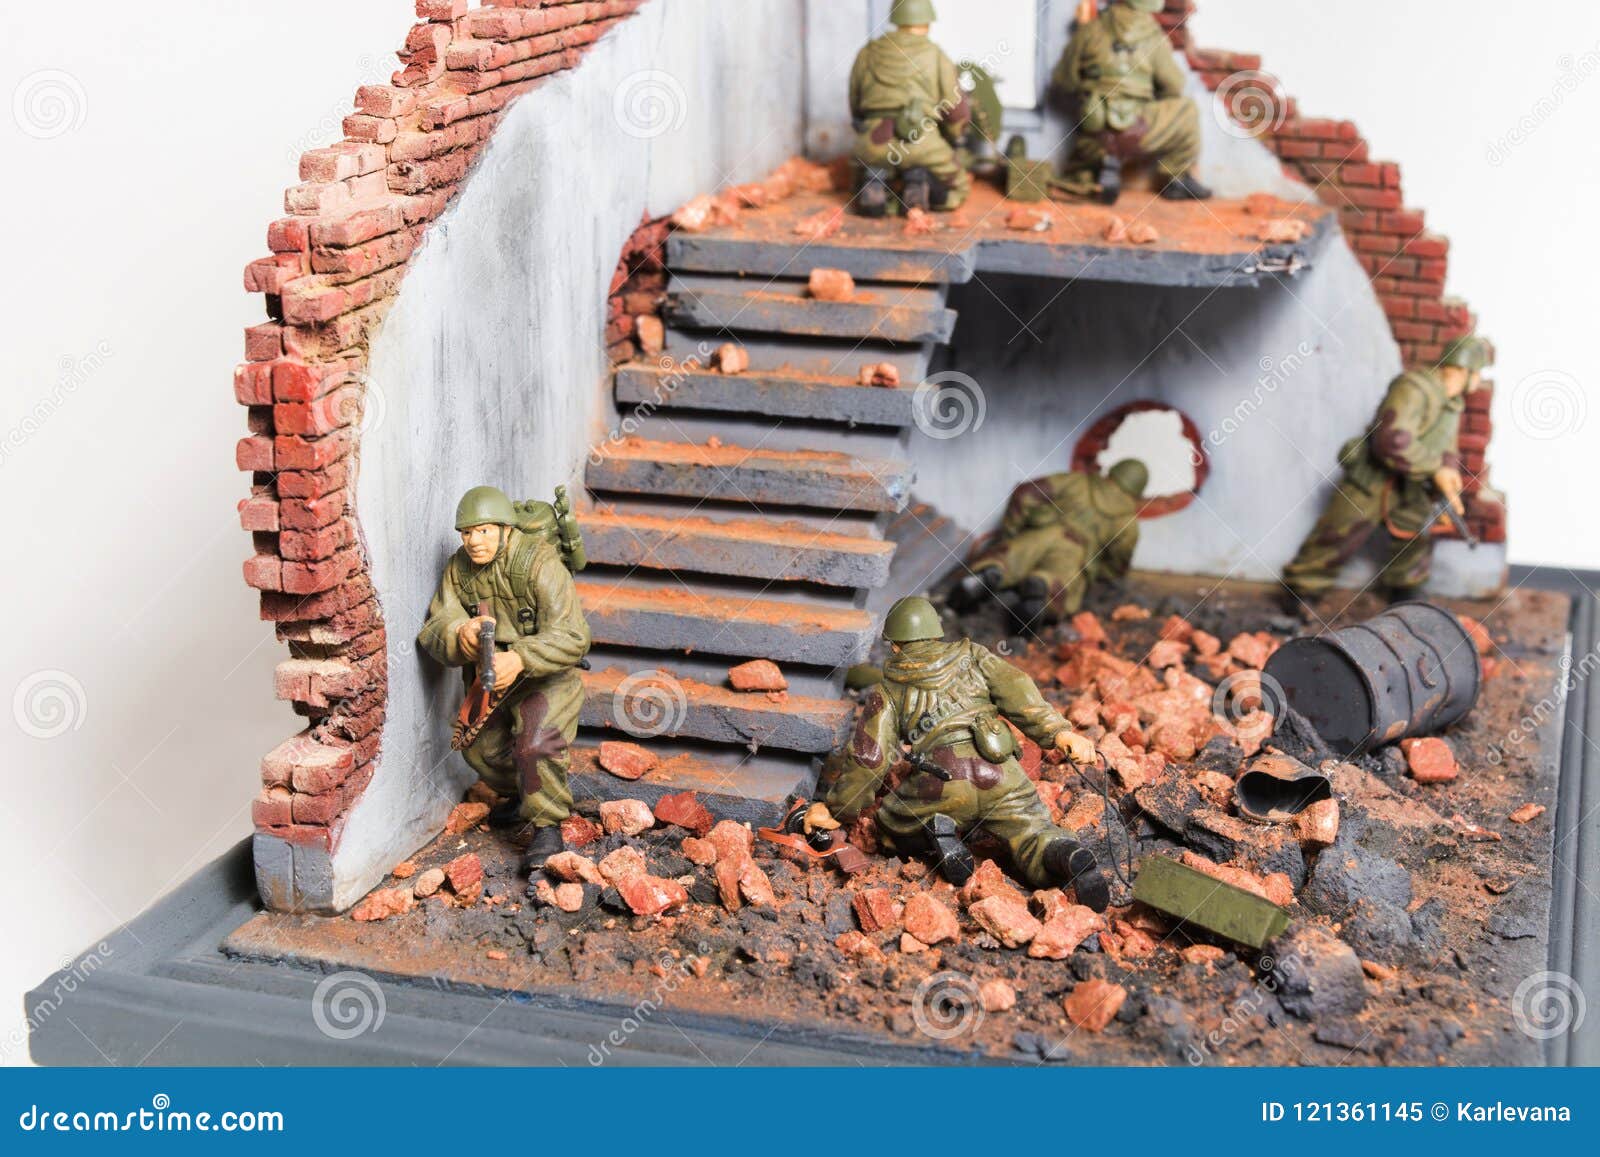 https://thumbs.dreamstime.com/z/part-diorama-six-soldiers-ruined-building-121361145.jpg